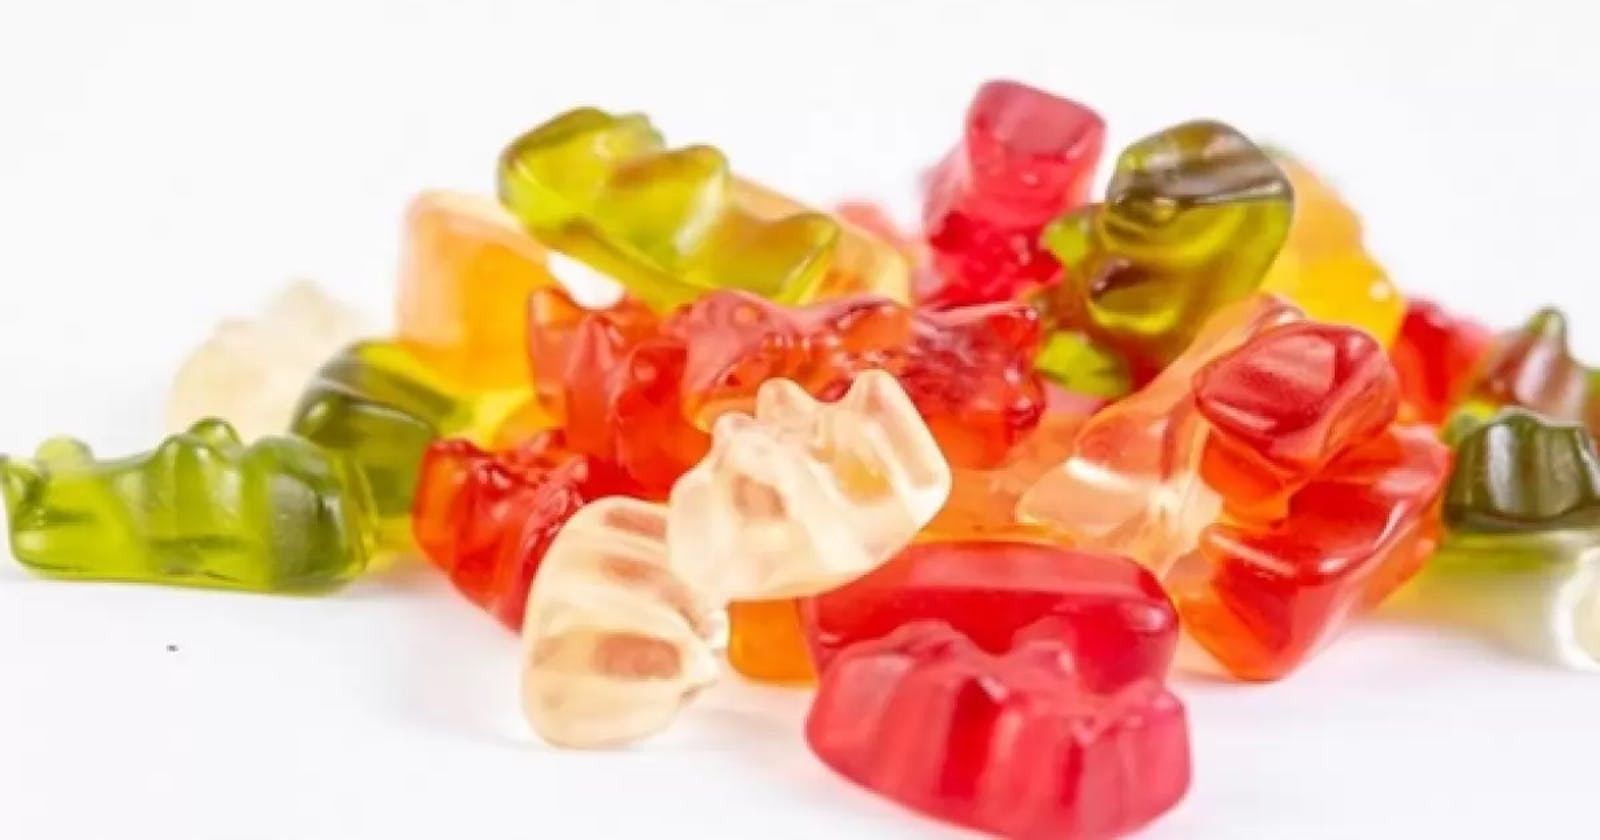 White Label CBD Gummies Reviews, Cost, Pros & Cons, Where to Buy?